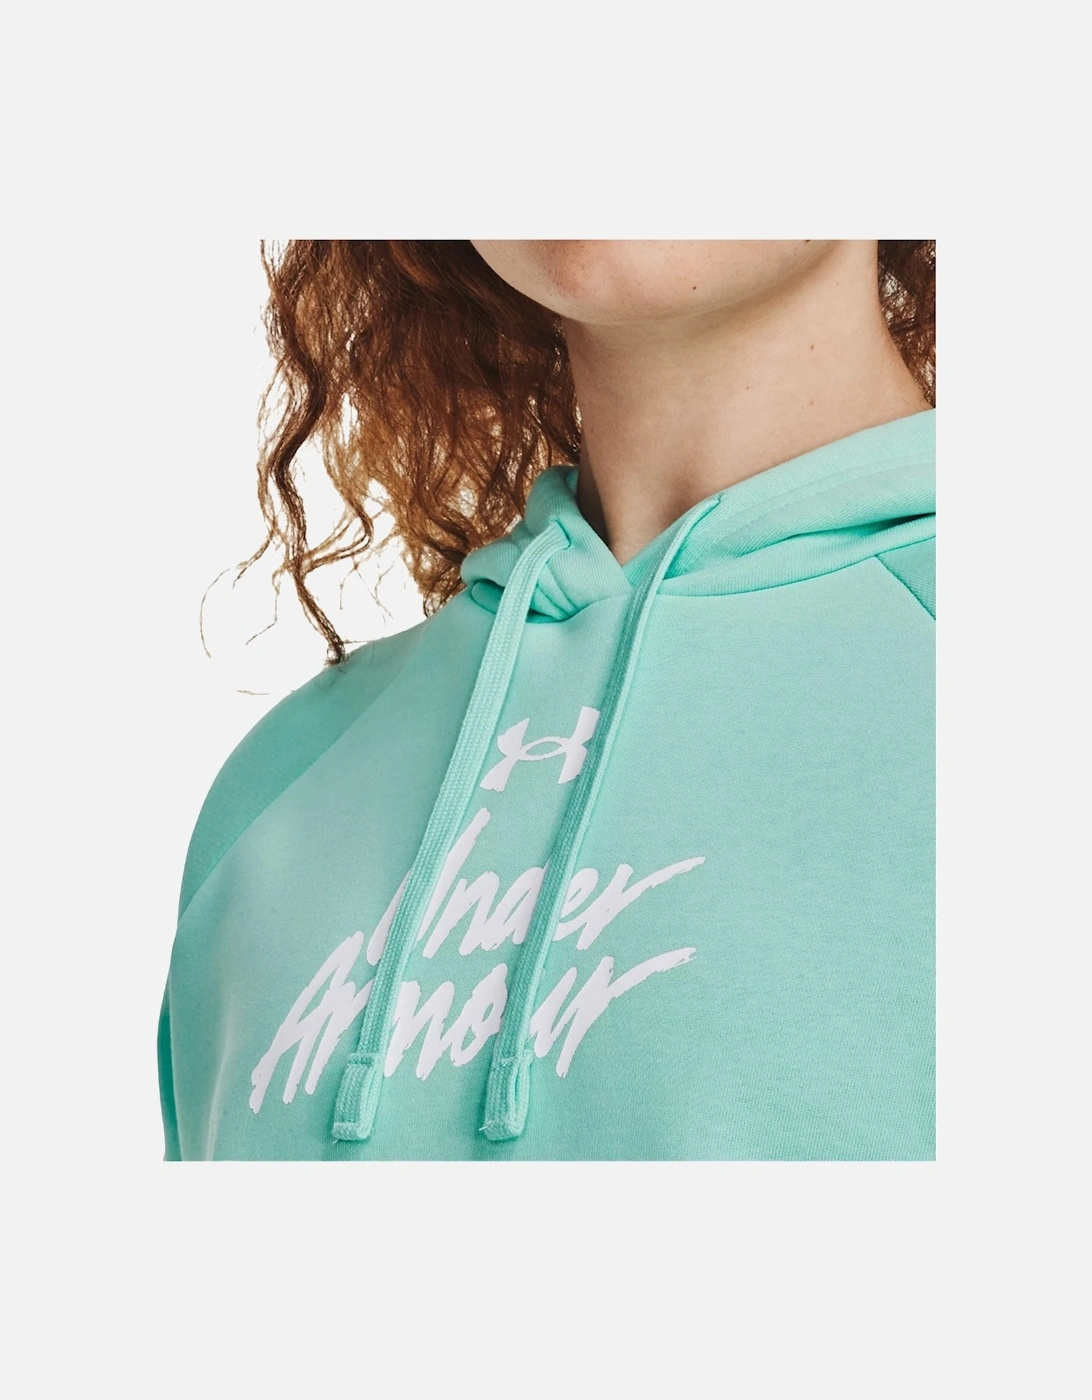 Womens Rival Fleece Graphic Hoodie (Turquoise)